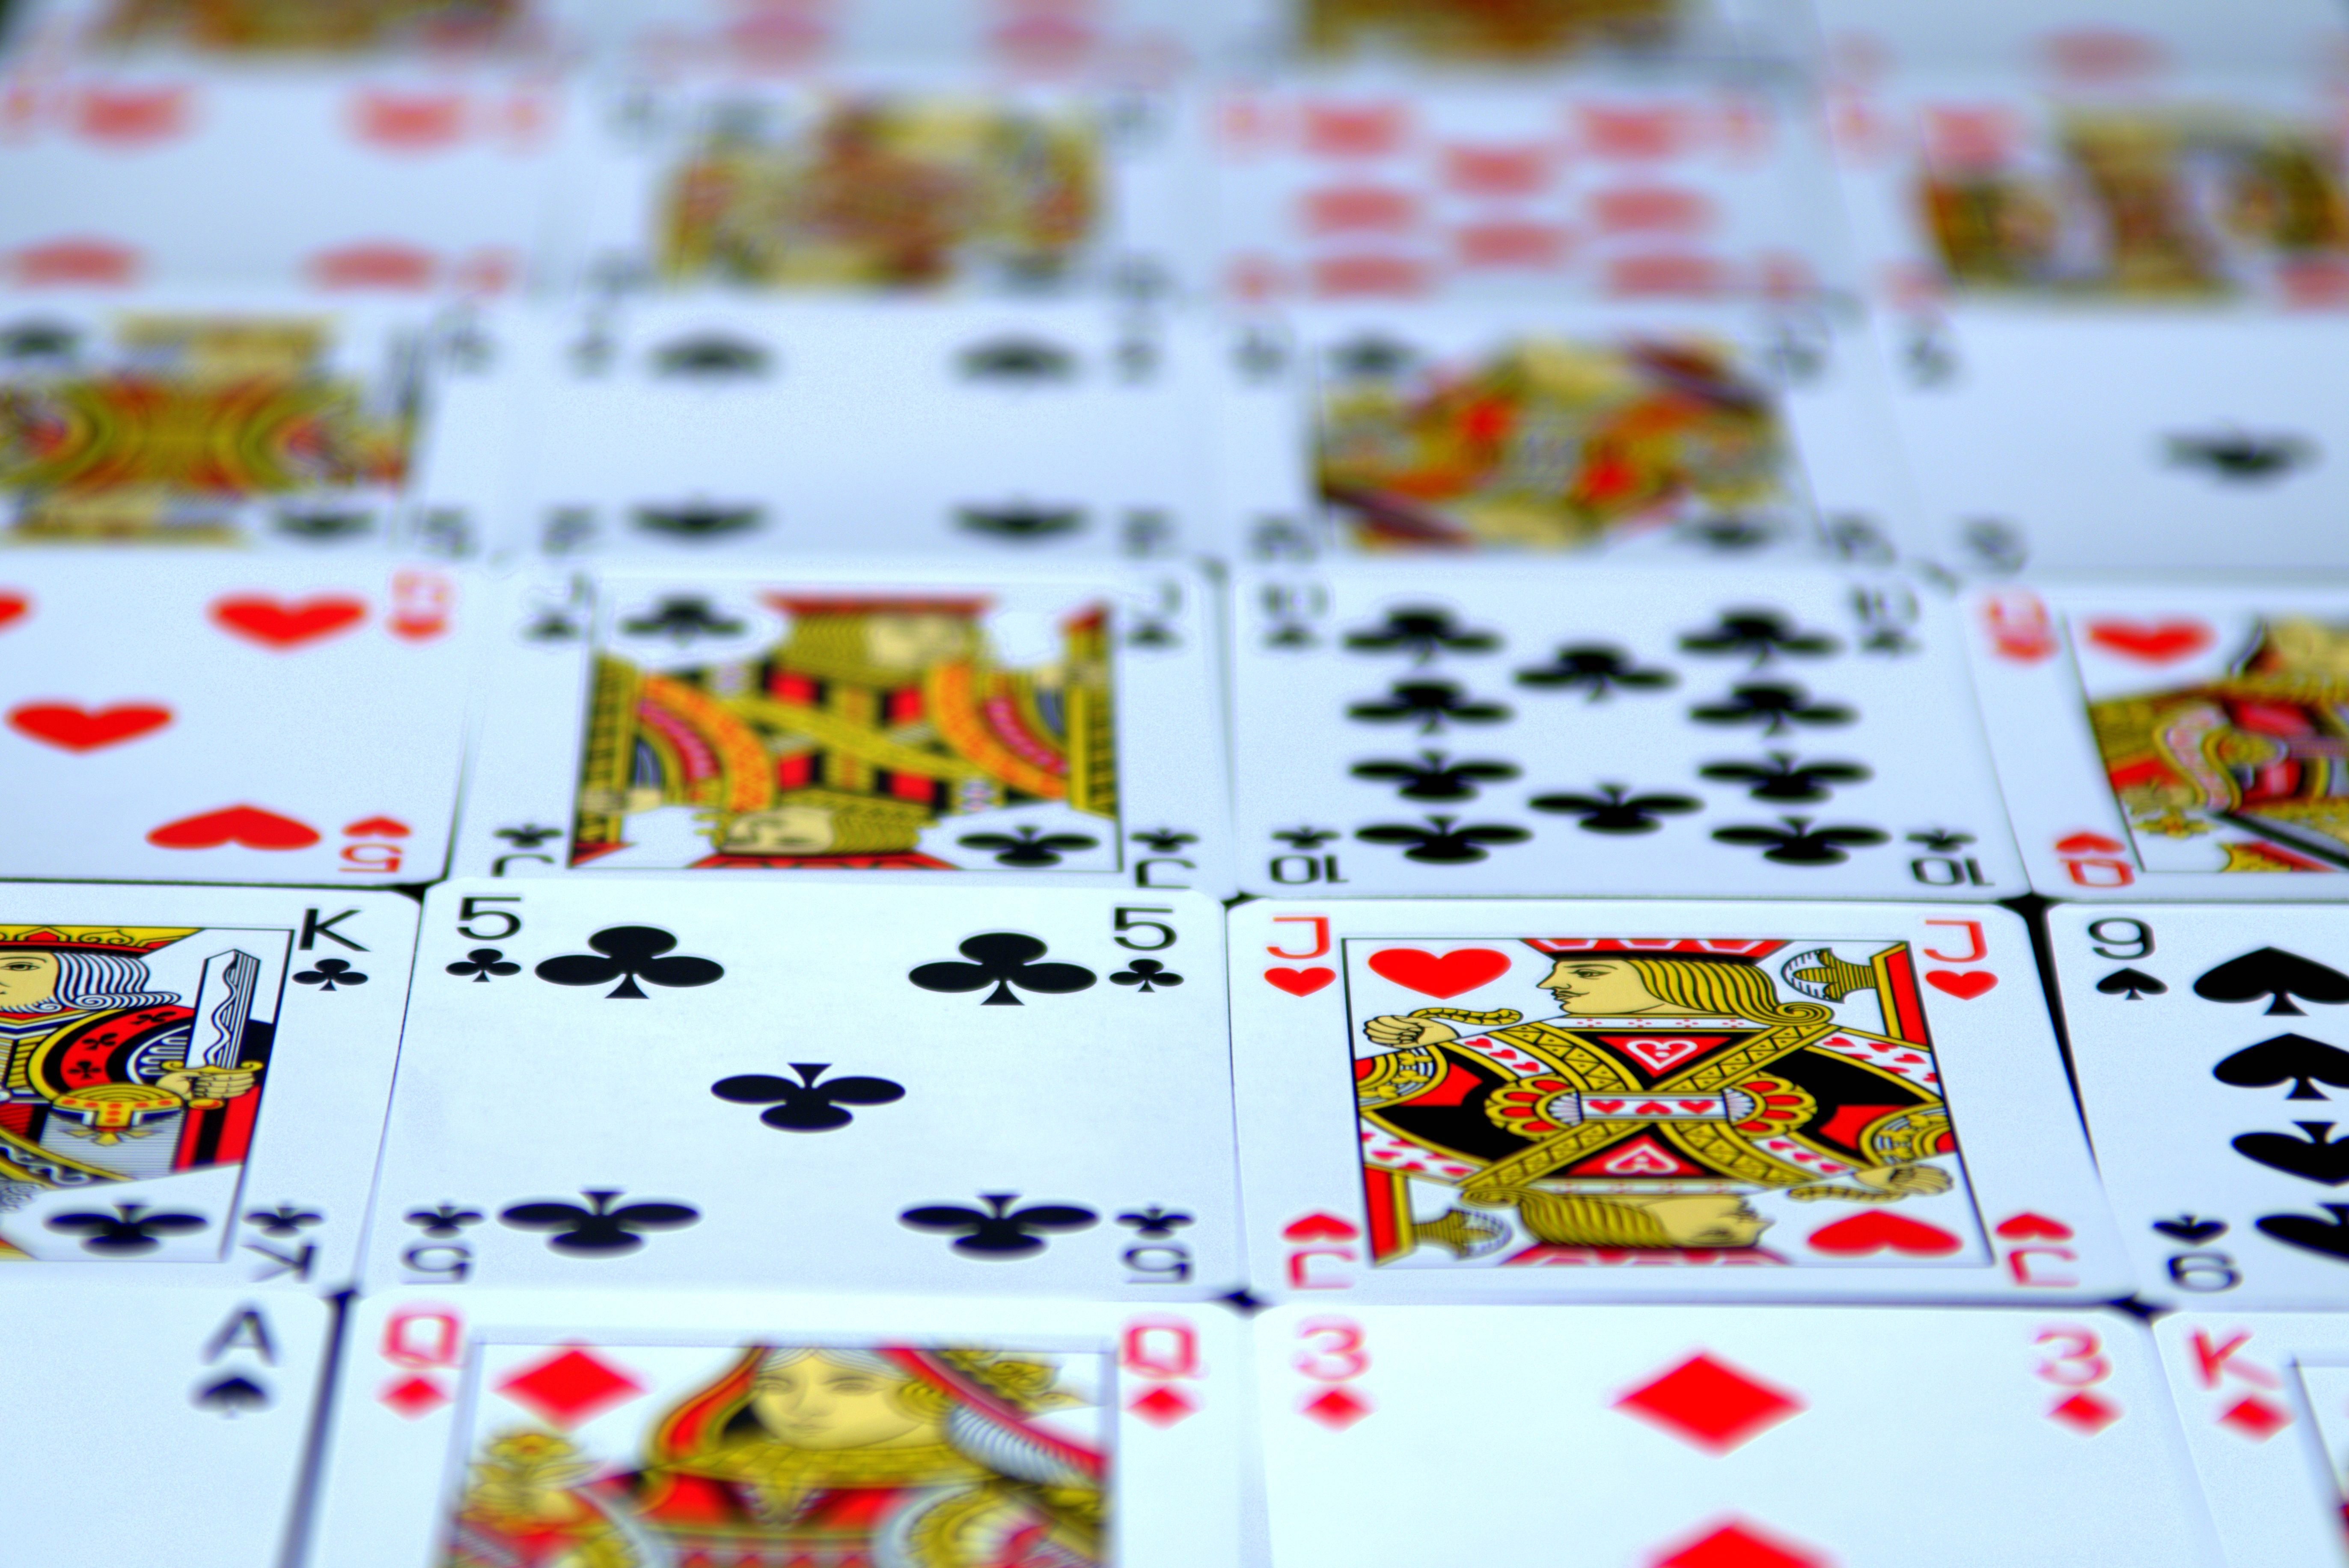 Poker Cards all laid out on the table image - Free stock ...